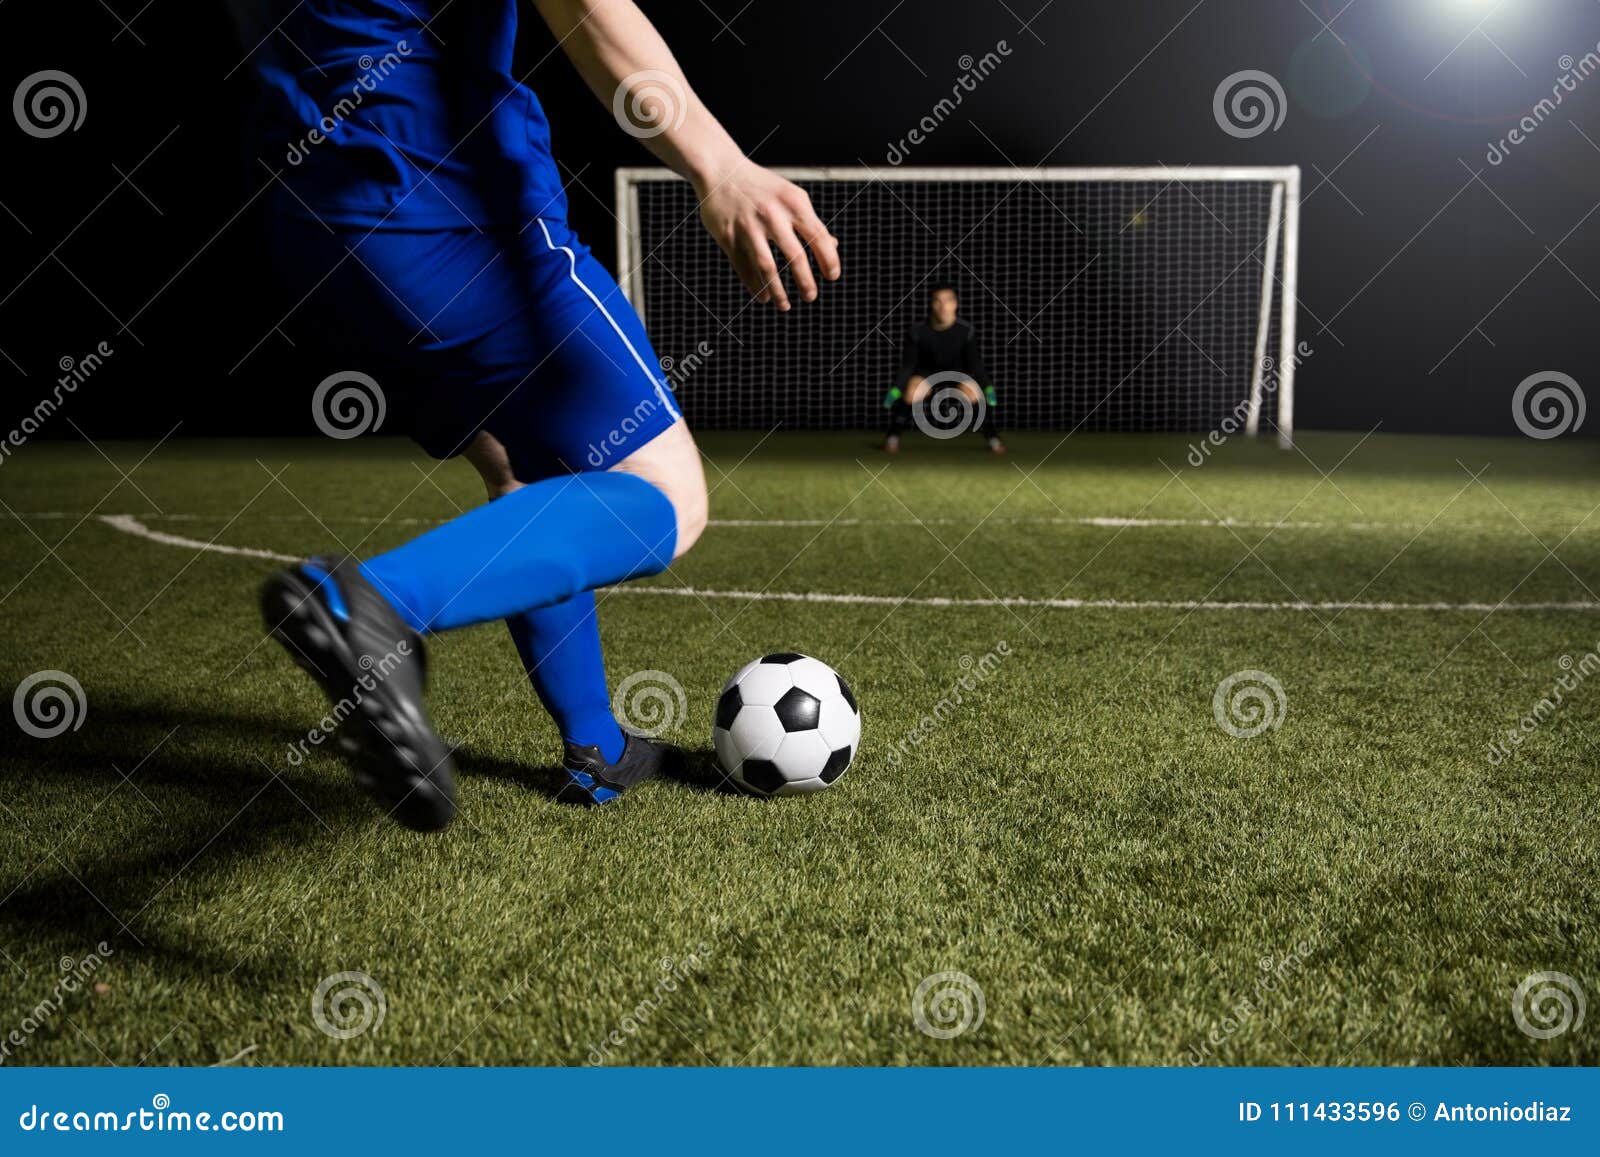 Soccer Player Making A Kick Towards The Goal Stock Photo Image